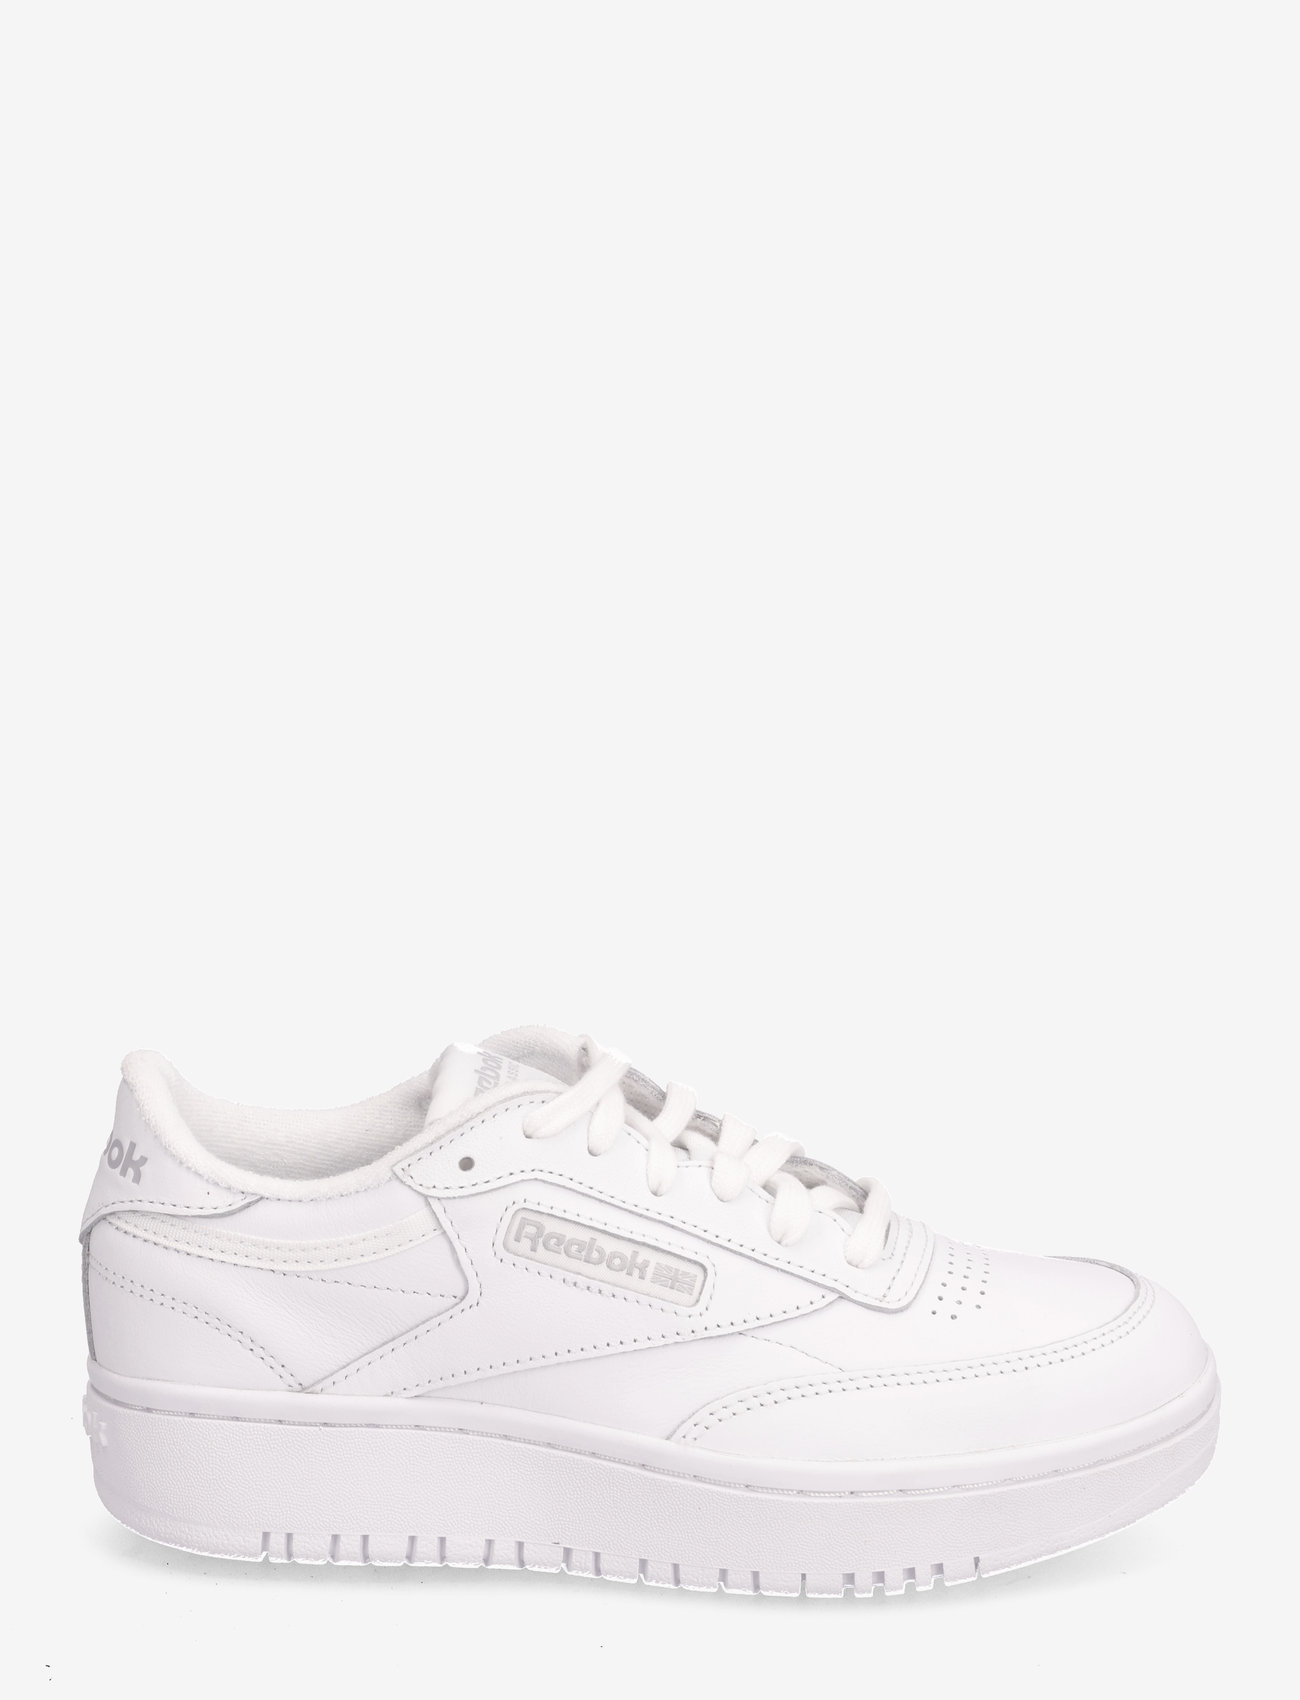 Reebok Classics - CLUB C DOUBLE - sneakers med lavt skaft - ftwwht/ftwwht/cdgry2 - 1